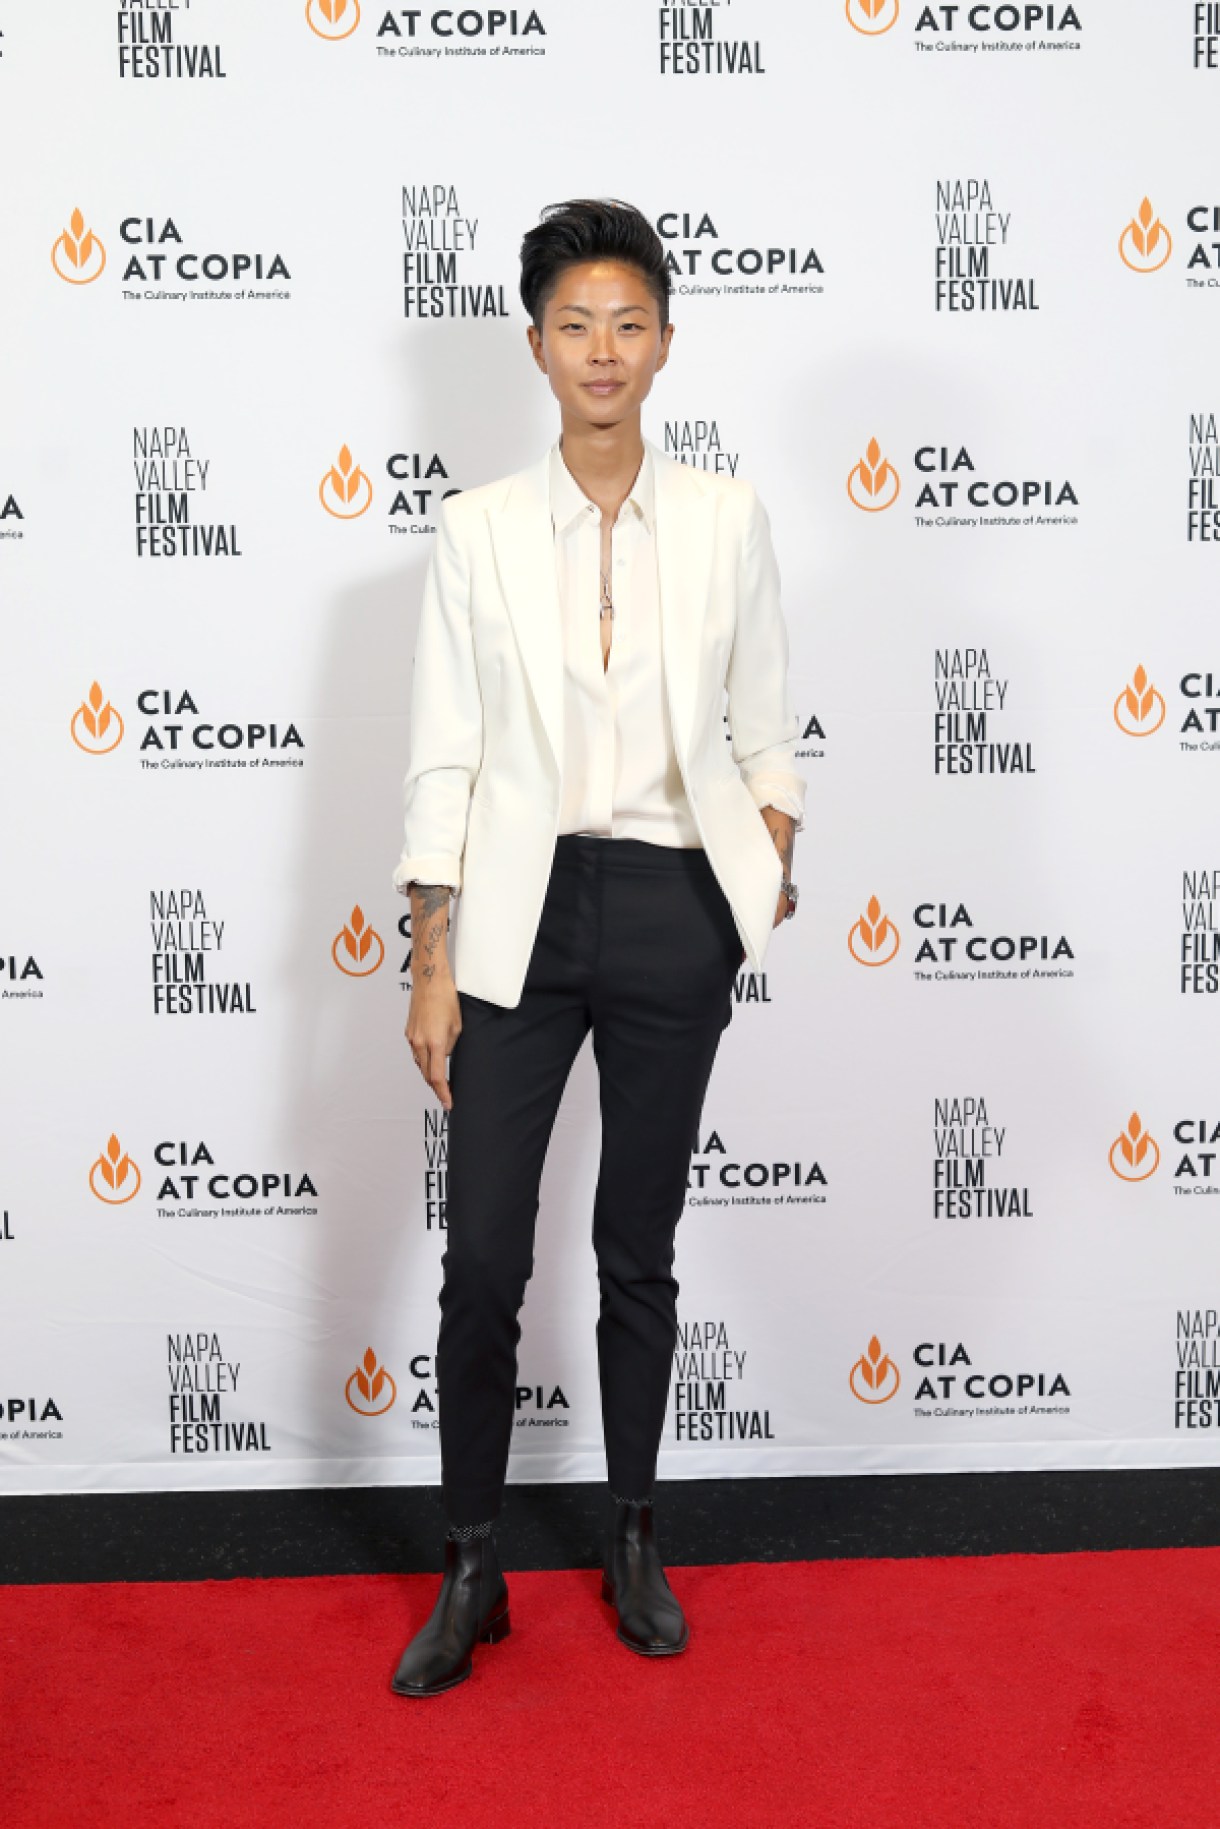 NAPA, CALIFORNIA - JUNE 15: Co-host Kristen Kish attends a screening, Q&A and dinner for Netflix's Iron Chef: Quest for an Iron Legend hosted by Napa Valley Film Festival and the Culinary Institute of America at Copia on June 15, 2022 in Napa, California. (Photo by Kelly Sullivan/Getty Images for Netflix)